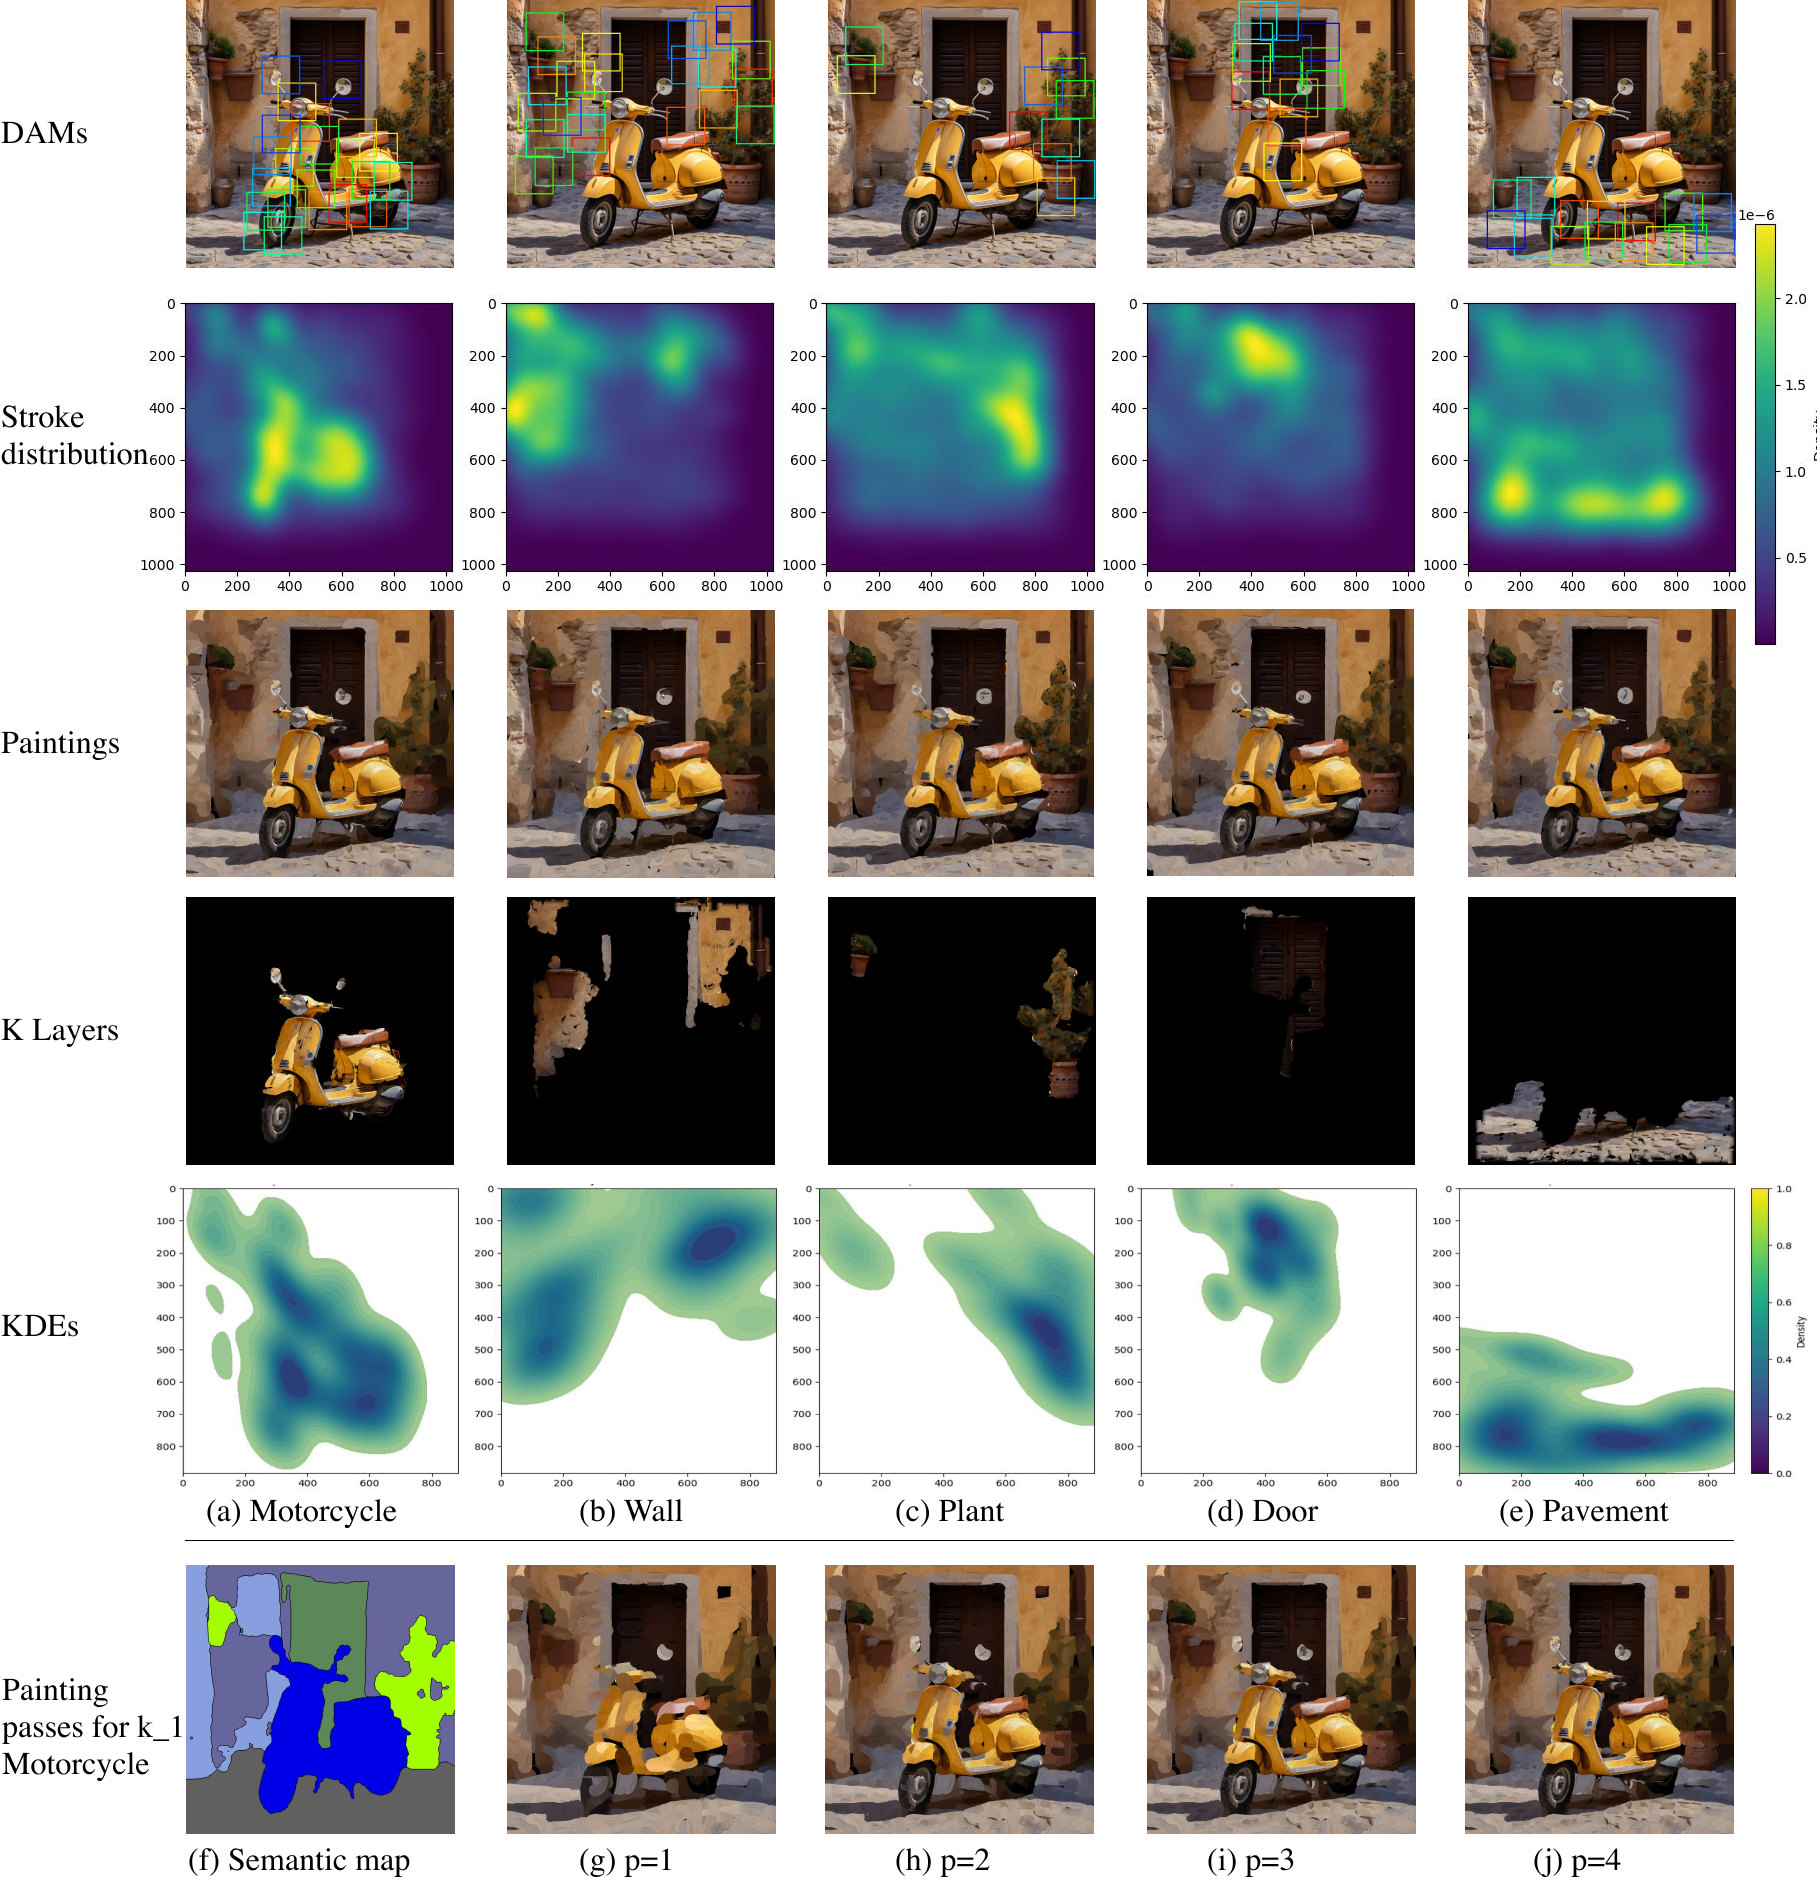 Grid of various images and analysis by artificial intelligence.